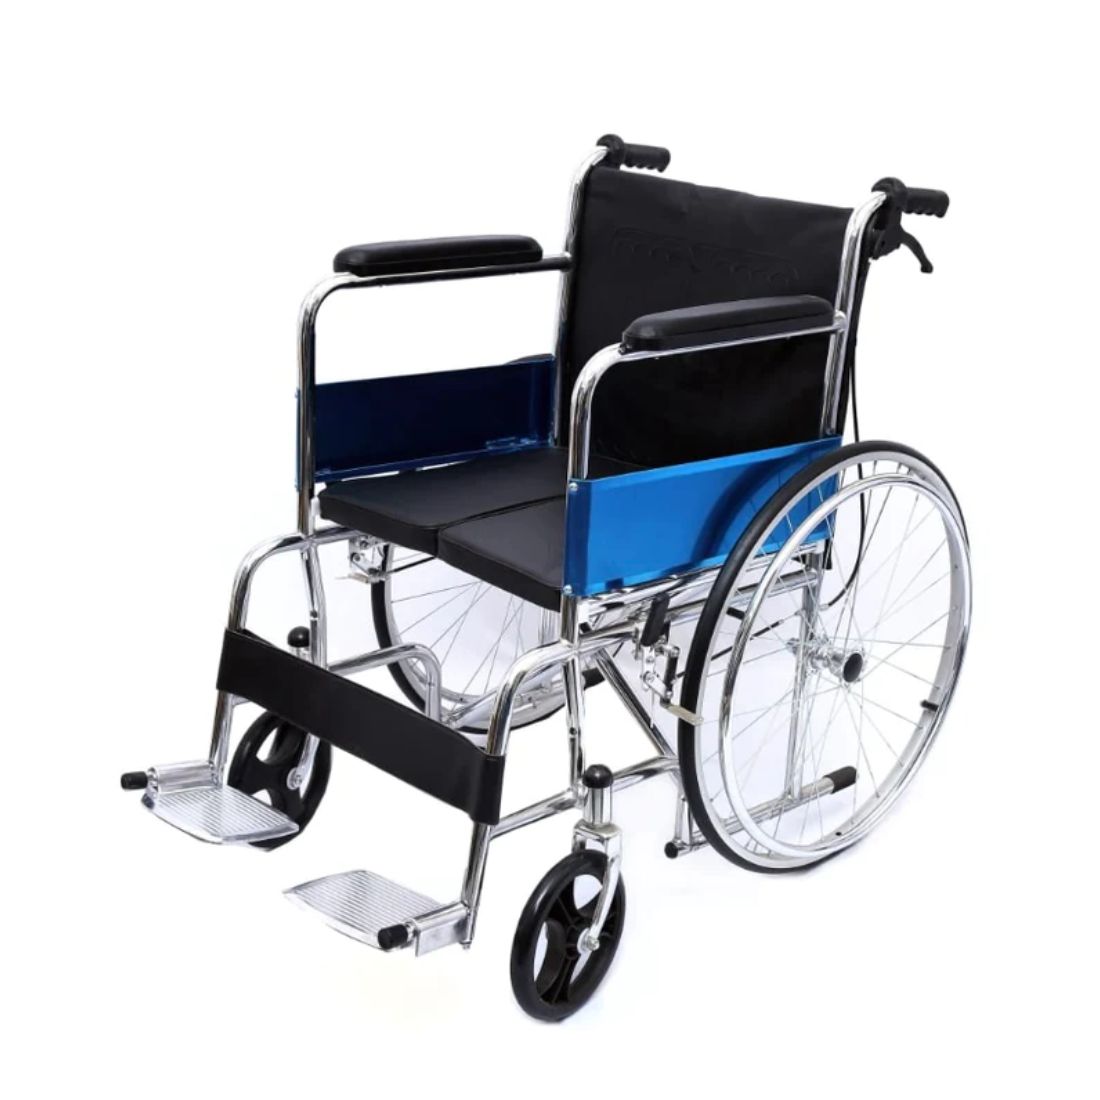 Foldable Wheelchair with Cushion Seat & Attendant Brake